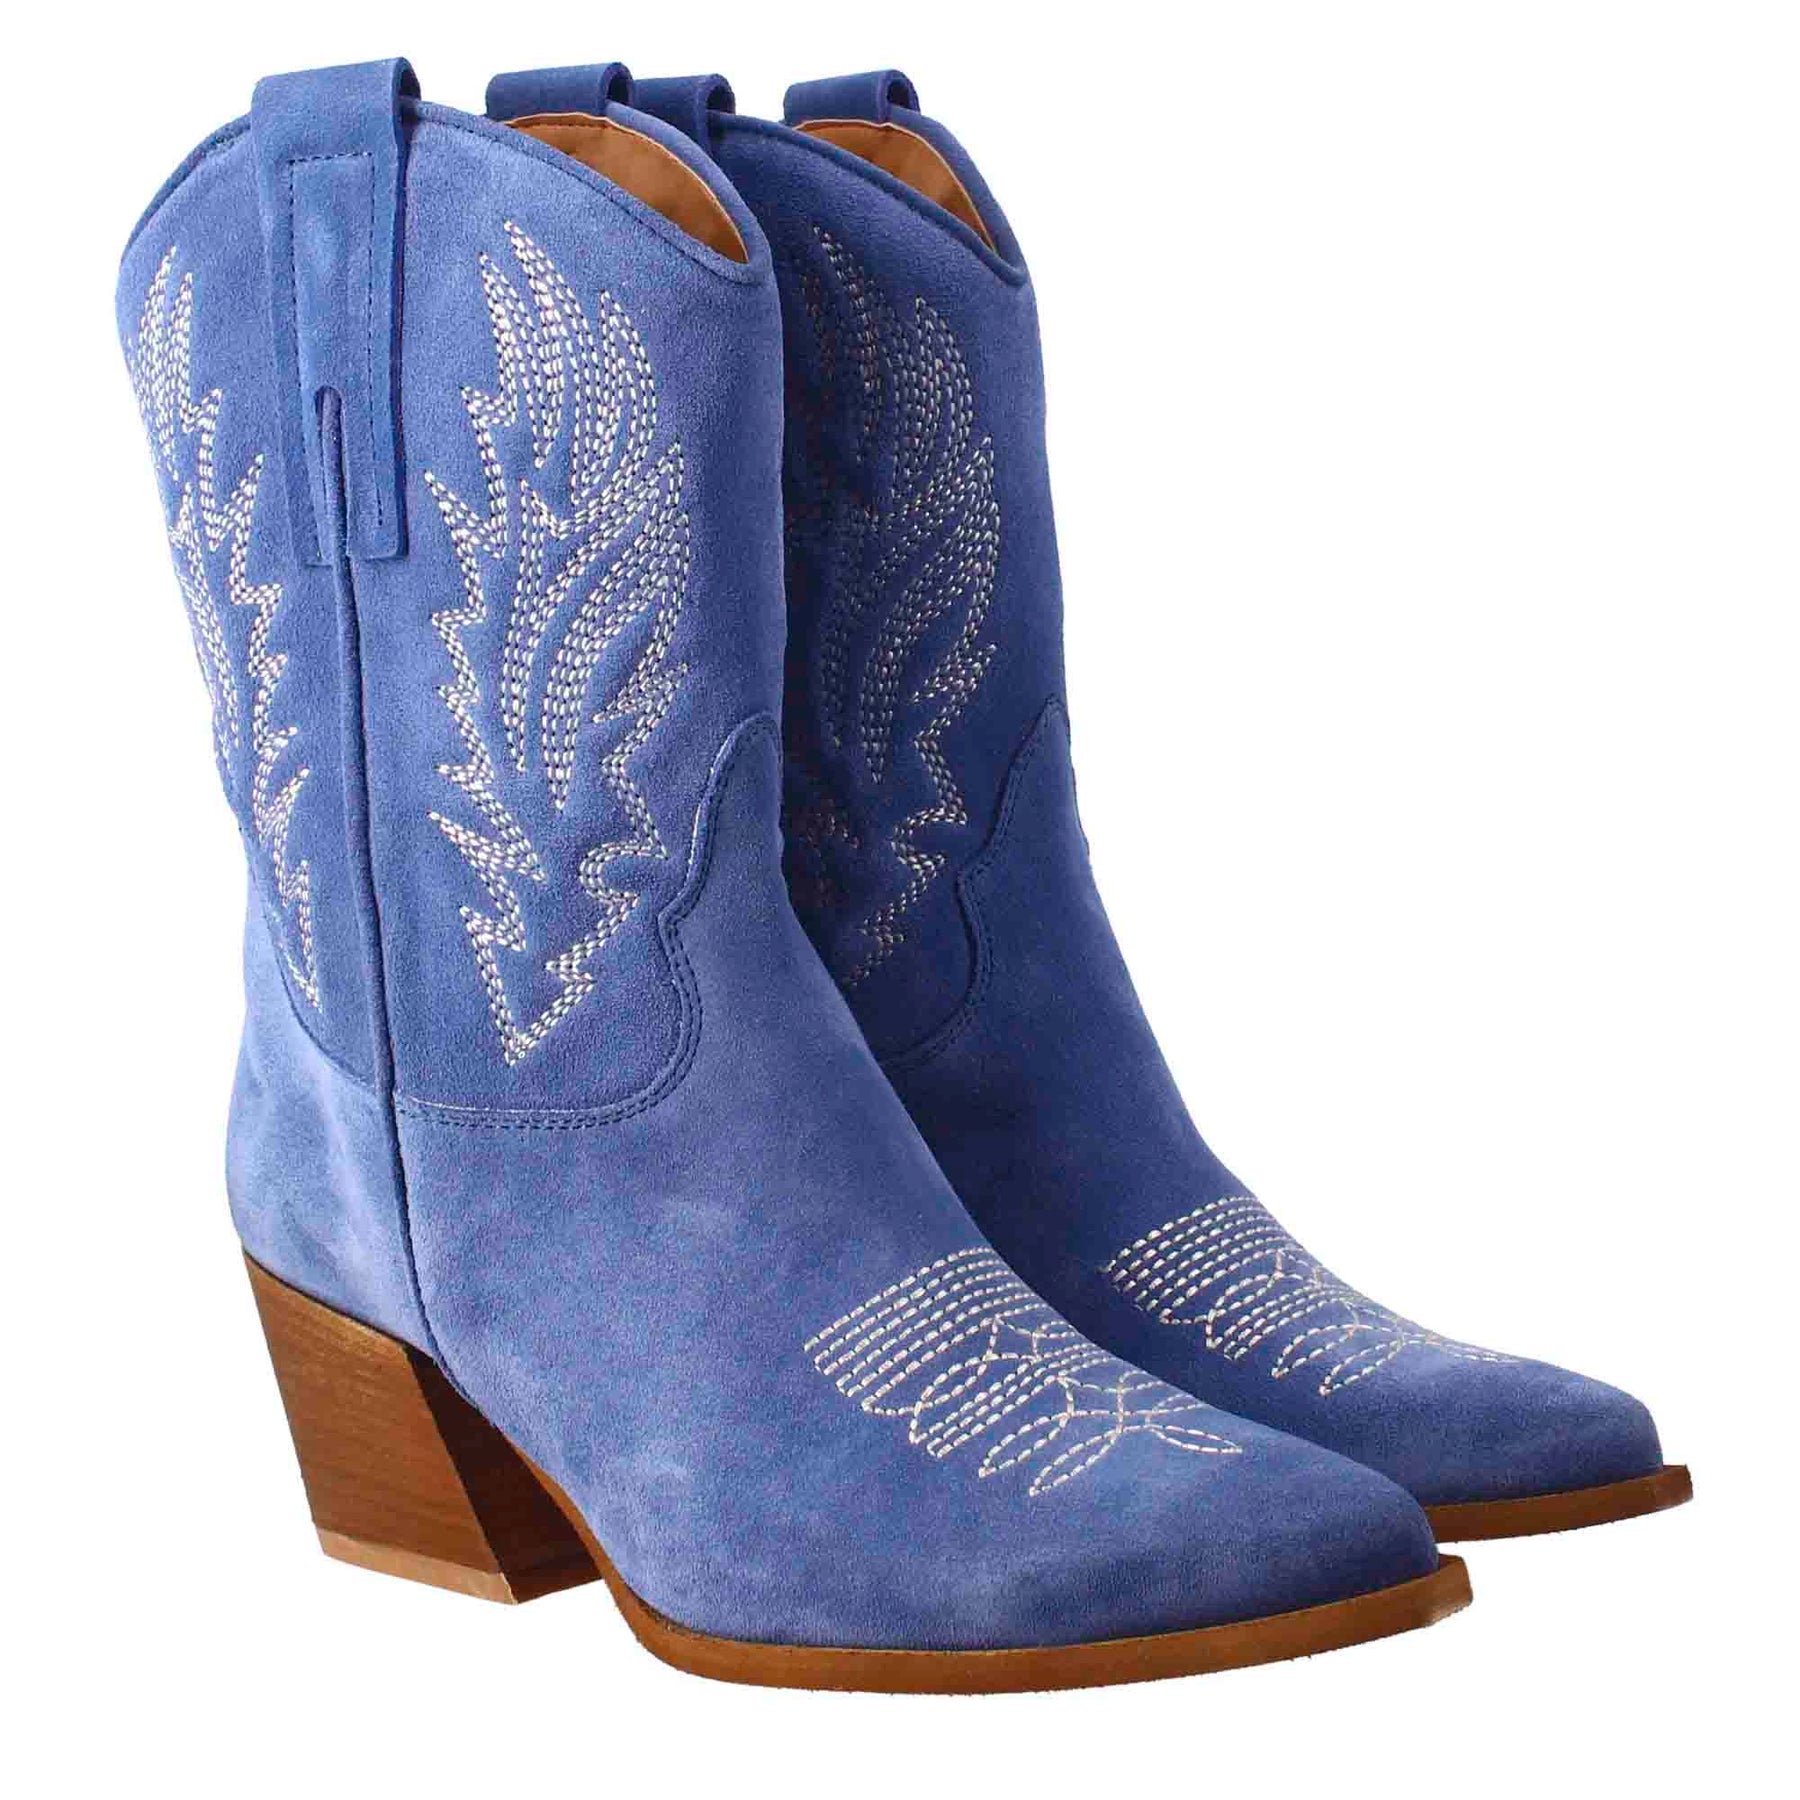 Texan women's ankle boot in light blue suede with embroidery.